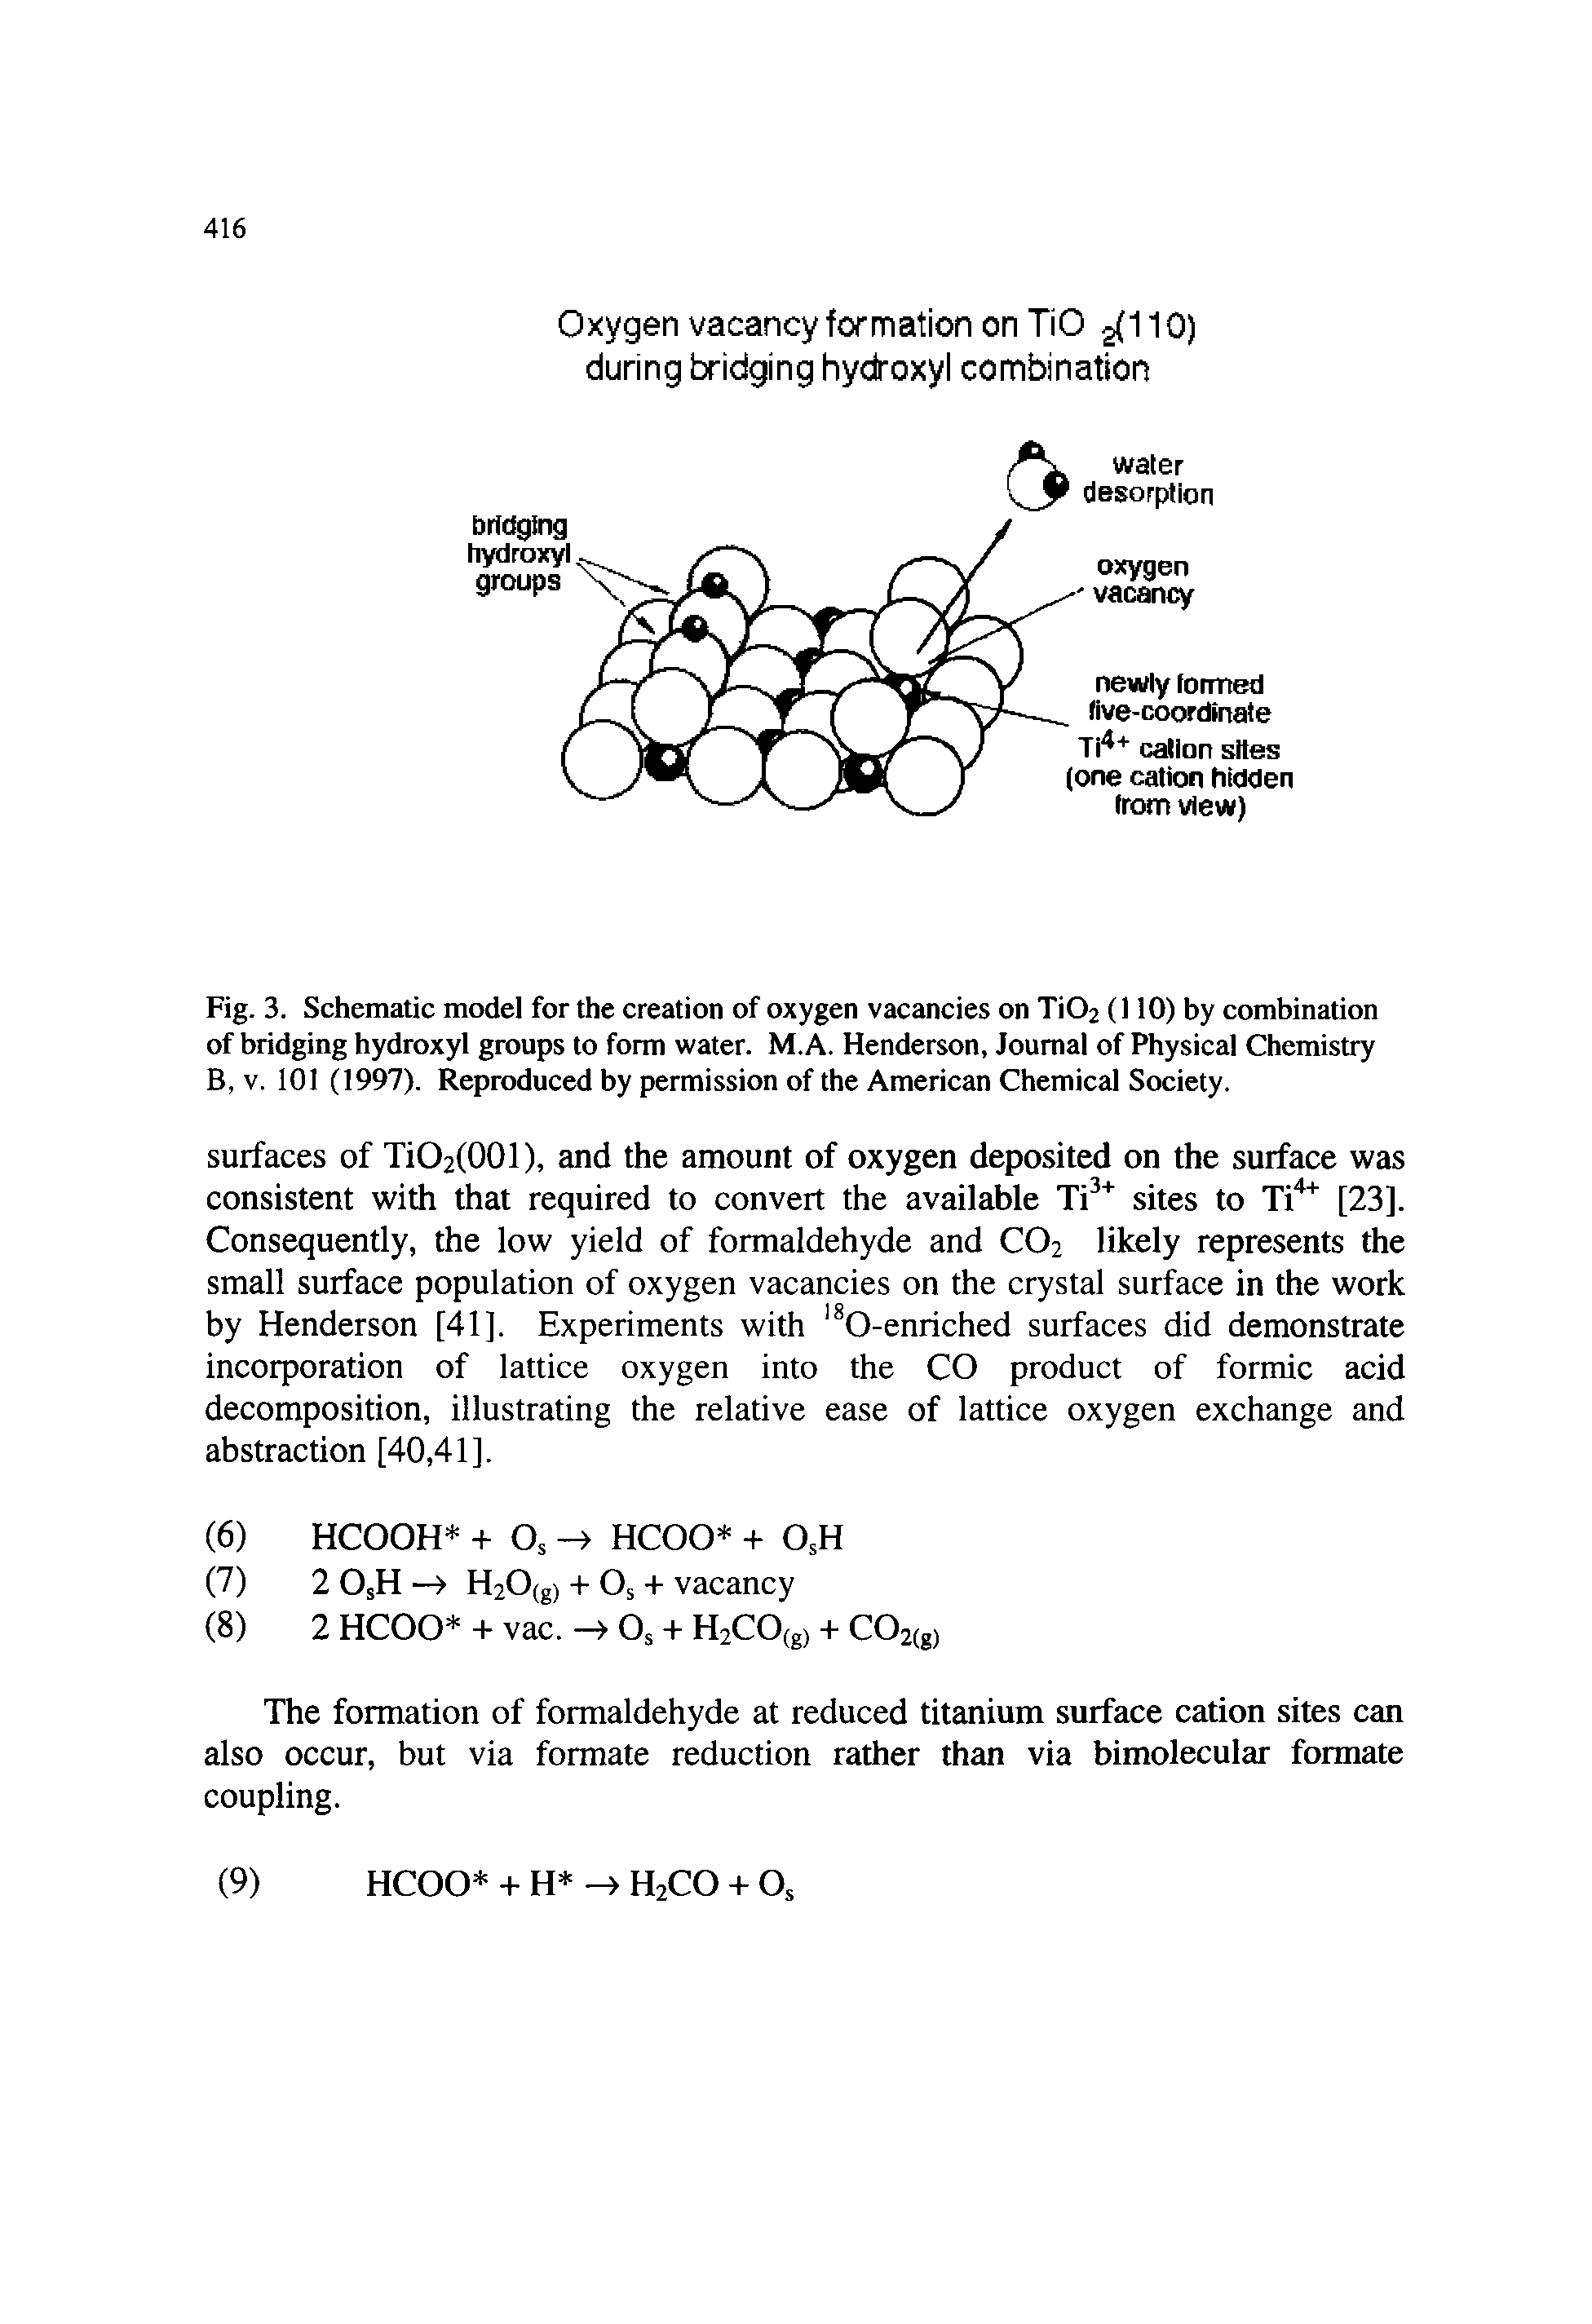 Fig. 3. Schematic model for the creation of oxygen vacancies on Ti02 (110) by combination of bridging hydroxyl groups to form water. M.A. Henderson, Journal of Physical Chemistry B, V. 101 (1997). Reproduced by permission of the American Chemical Society.